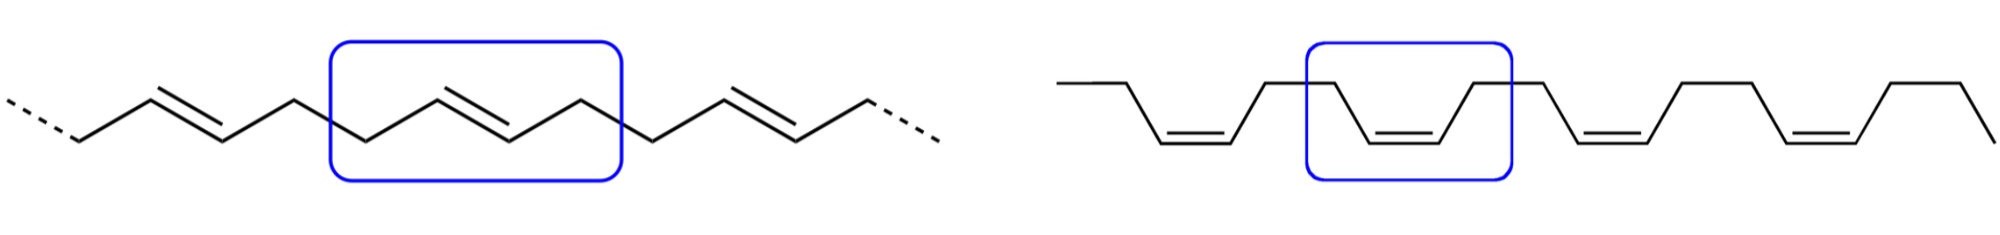 Line diagrams of trans-1,4-polybutadiene on the left and cis-1,4-polybutadiene on the right.